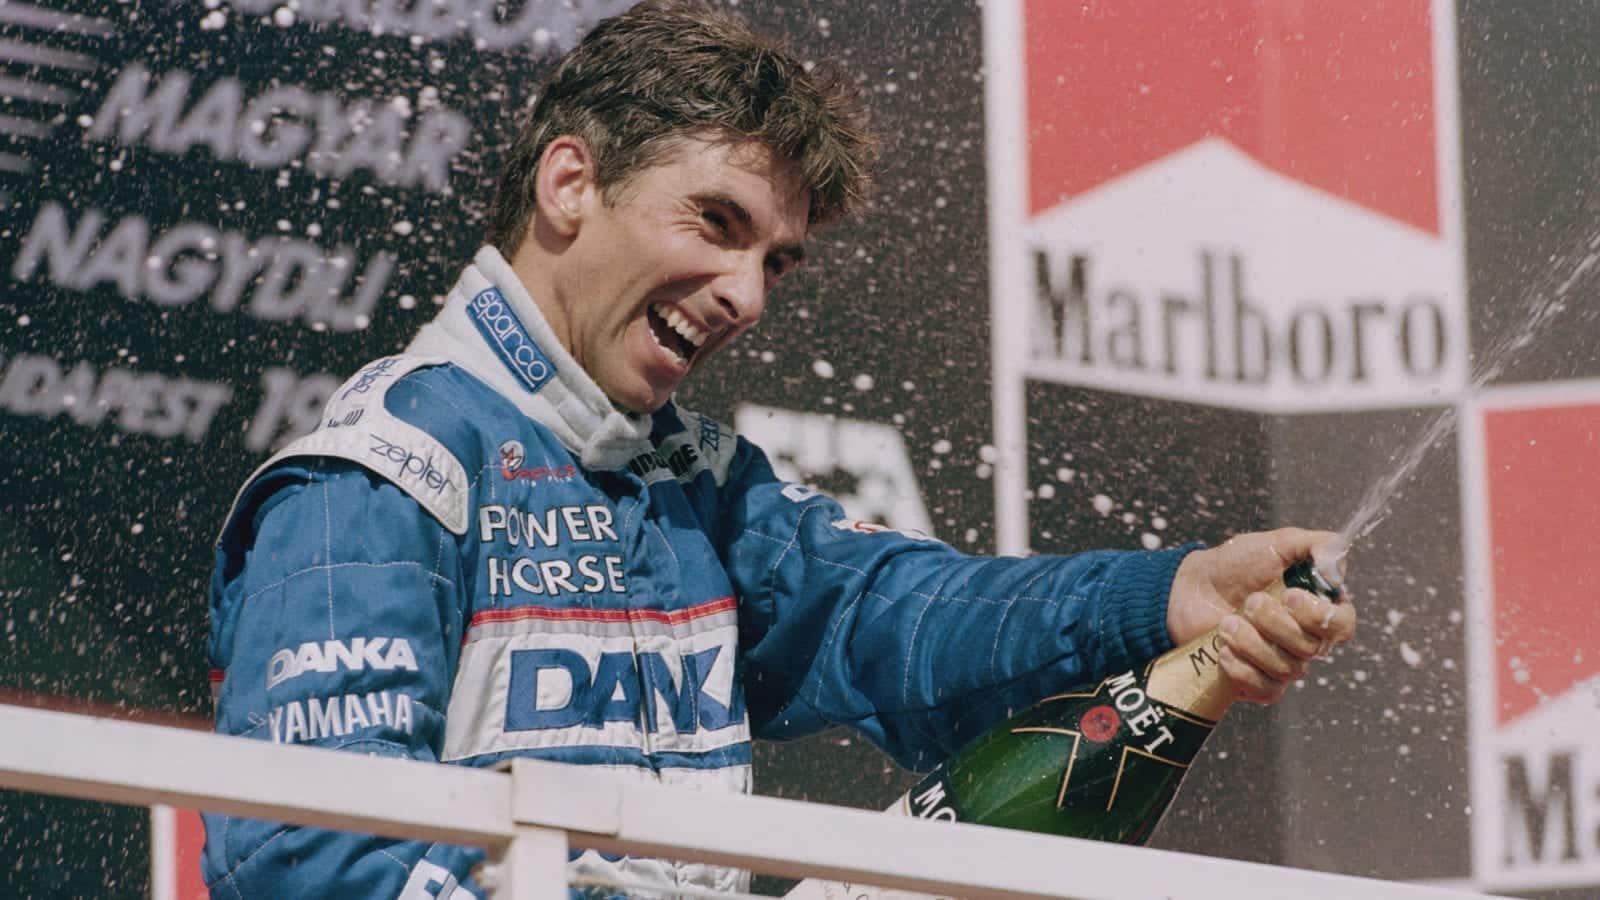 Damon Hill on the podium after finishing second in the 1997 F1 Hungarian Grand Prix driving an Arrows